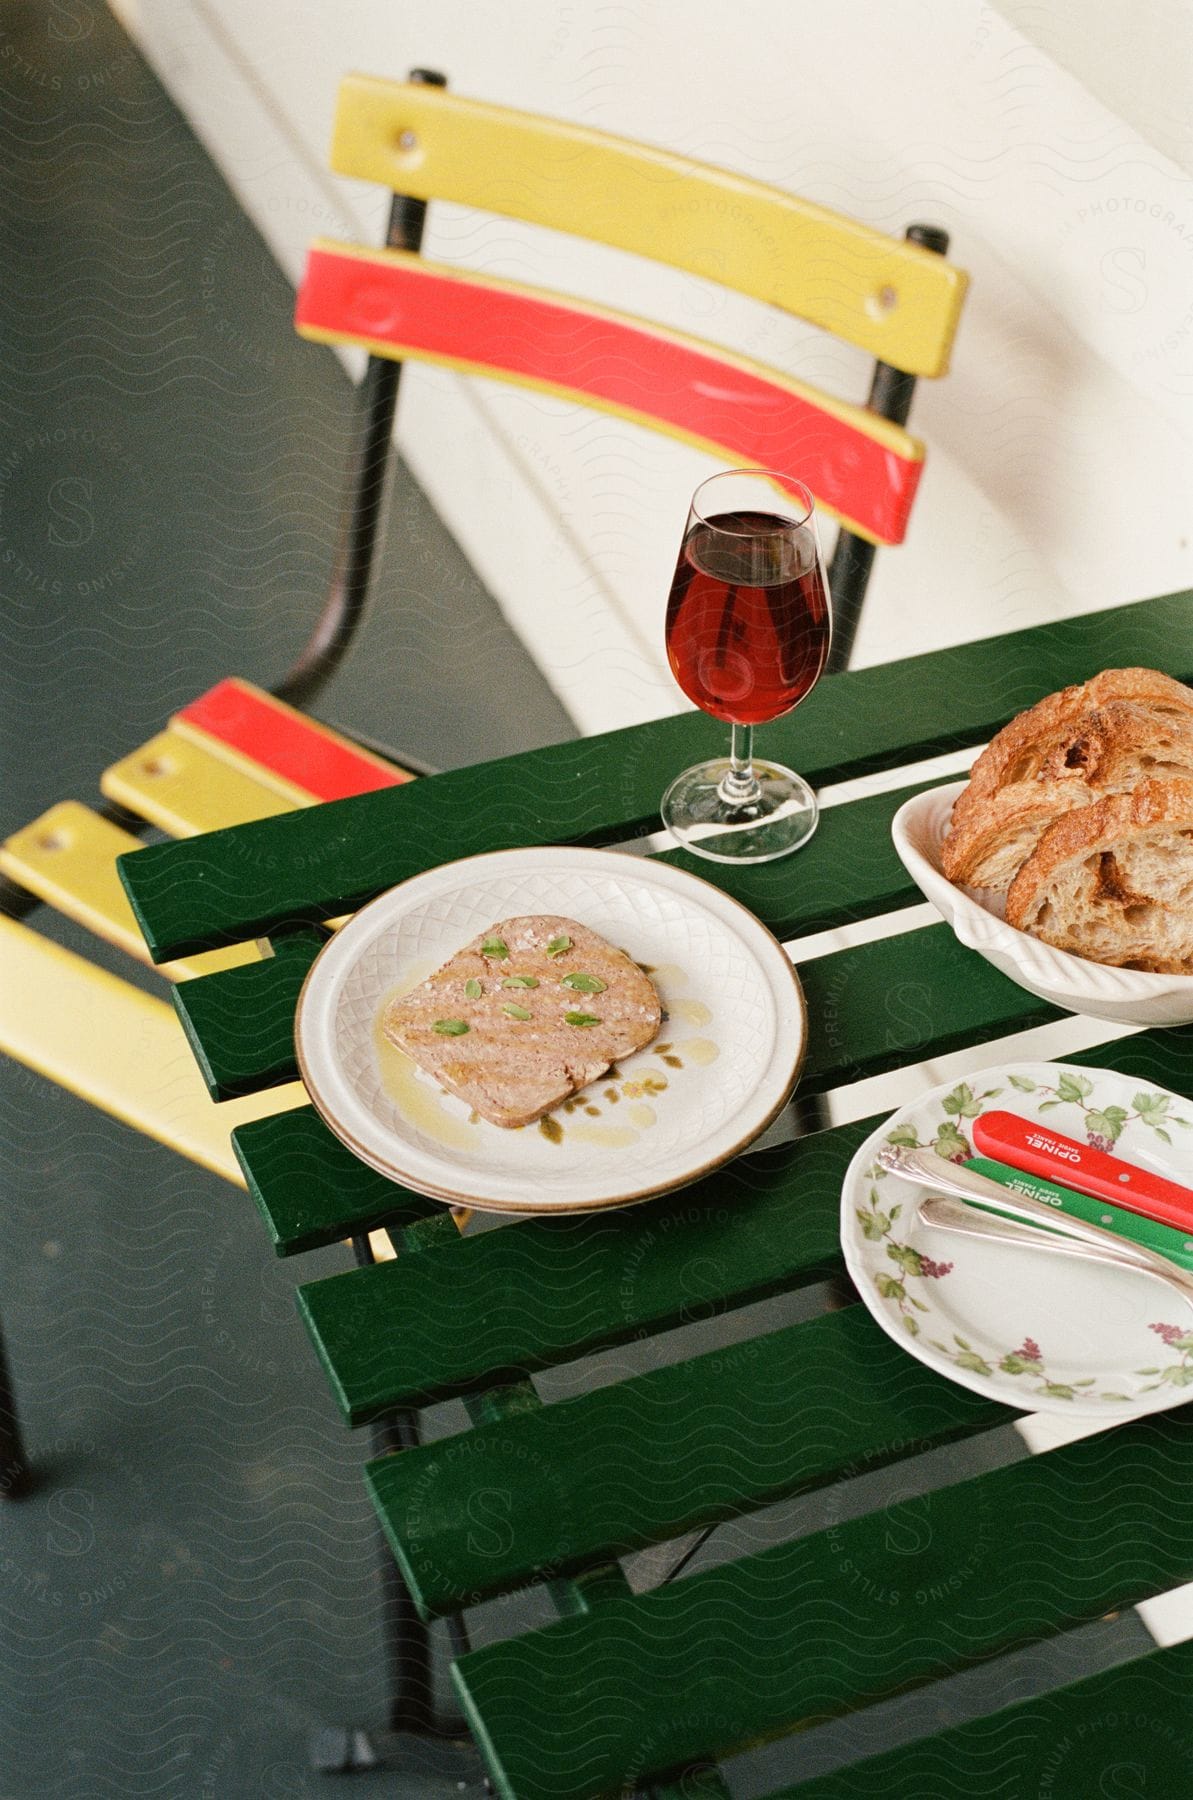 A sandwich and a glass of wine on the green wooden table.